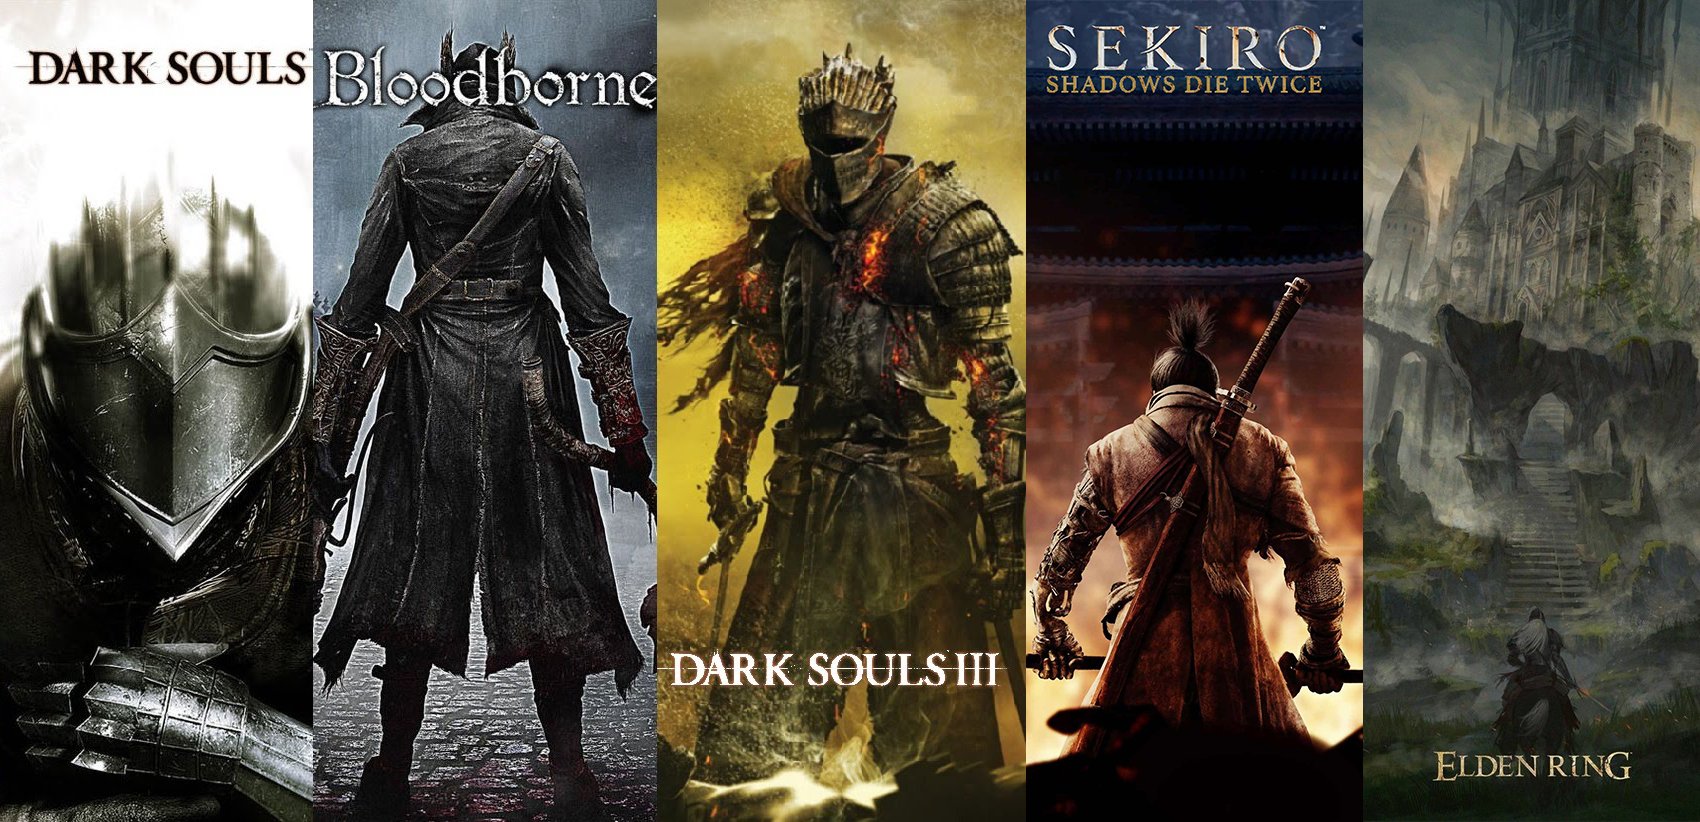 KAMI on X: From Software has been one of the best developers in